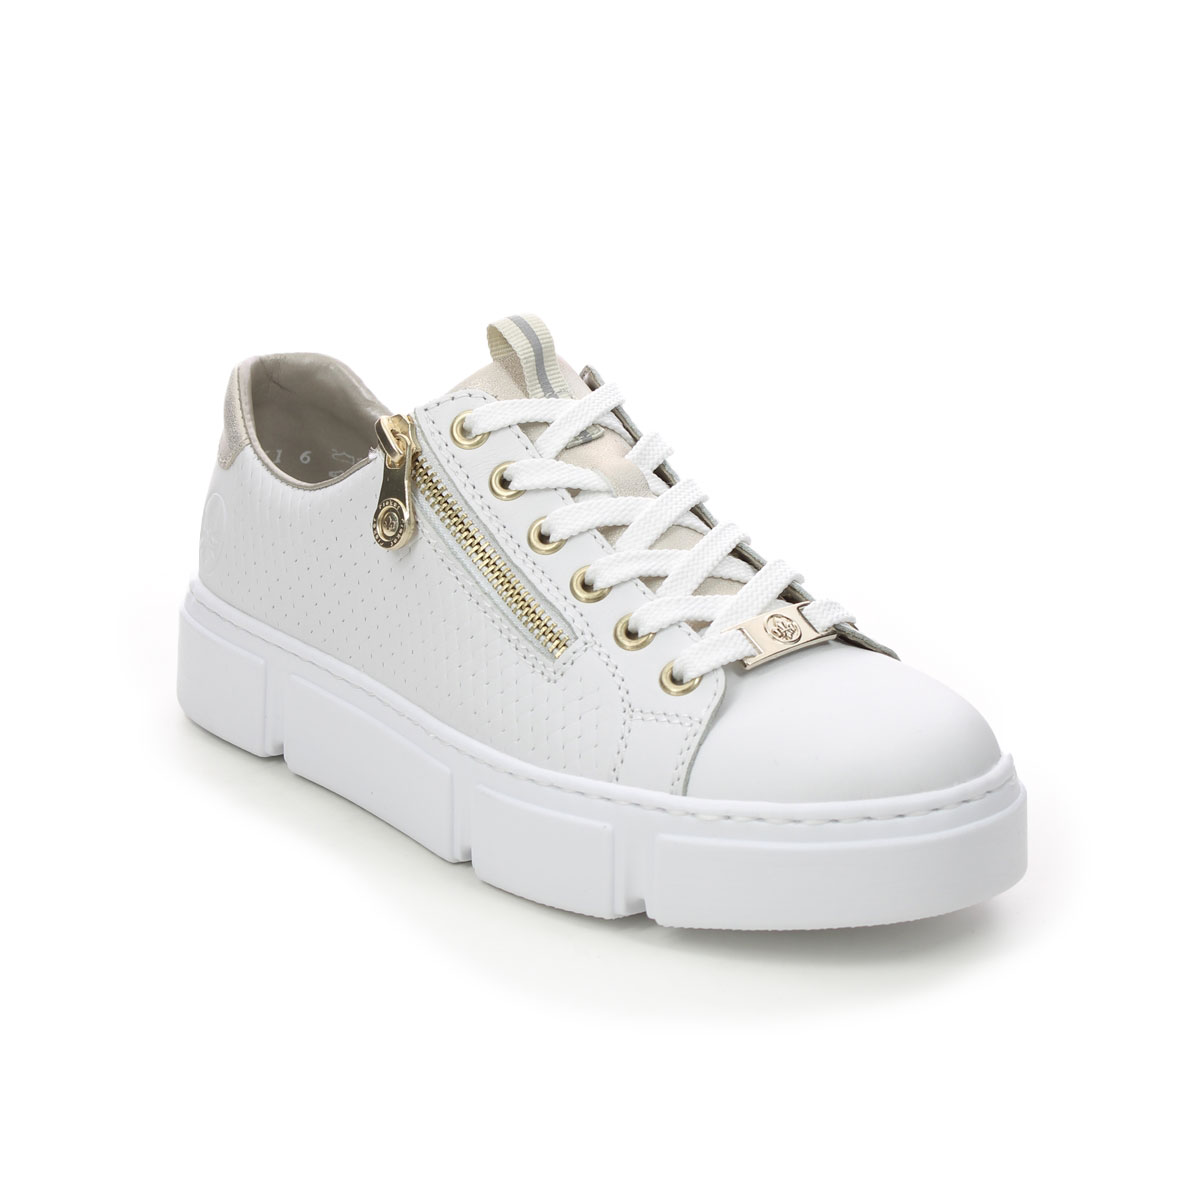 Rieker Hagen White Leather Womens Trainers N5932-80 In Size 38 In Plain White Leather